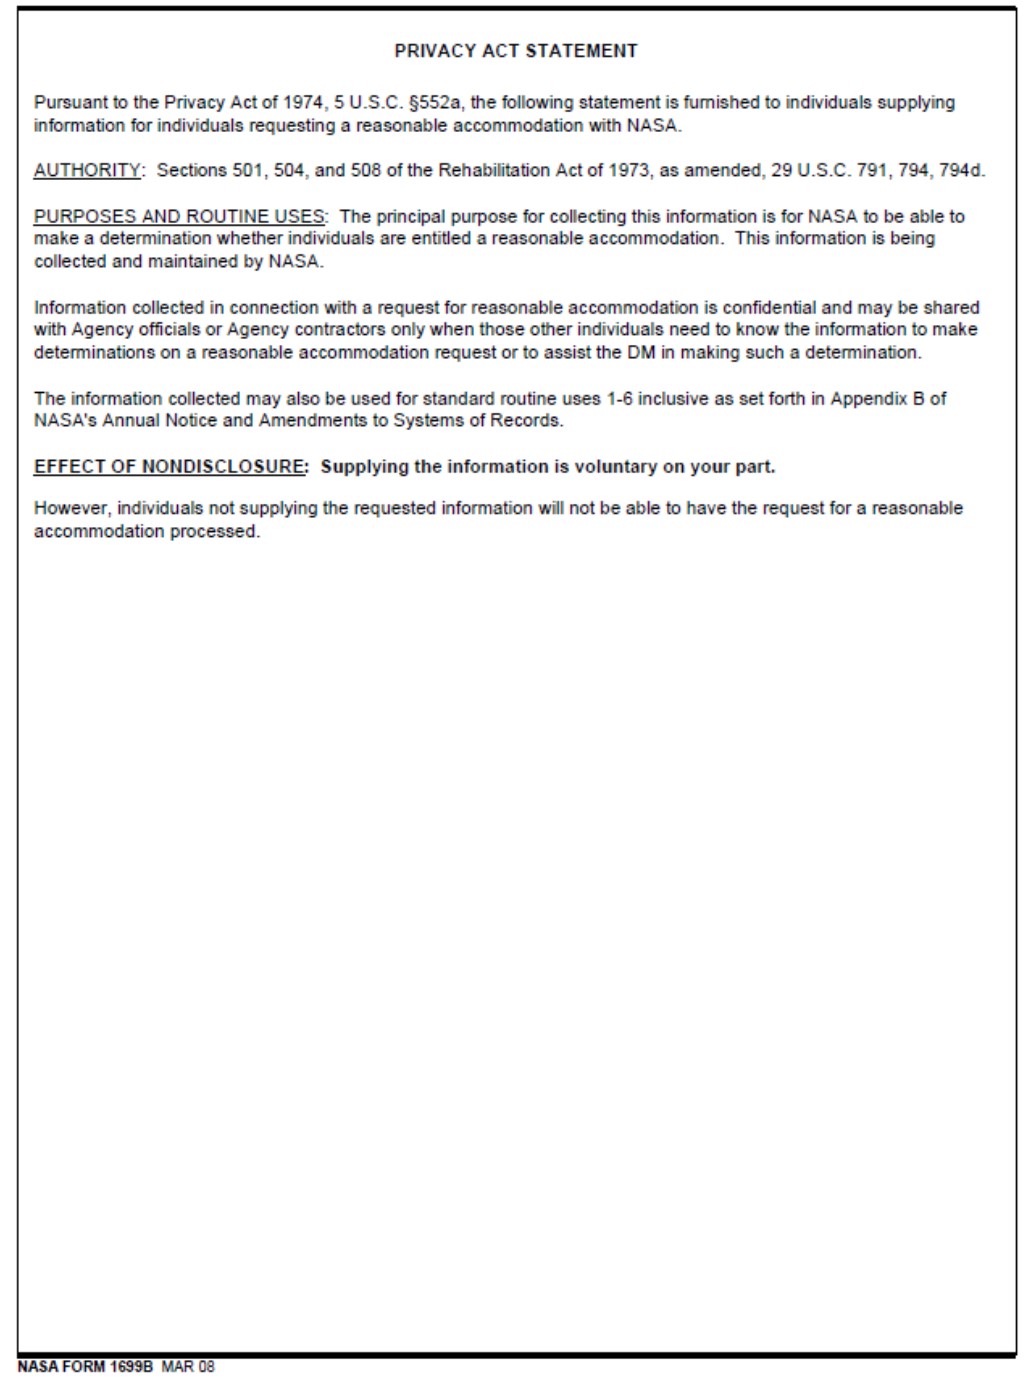 Figure F.3 image shows page 2 of the NF1699B Denial of Reasonable Accommodation Request.